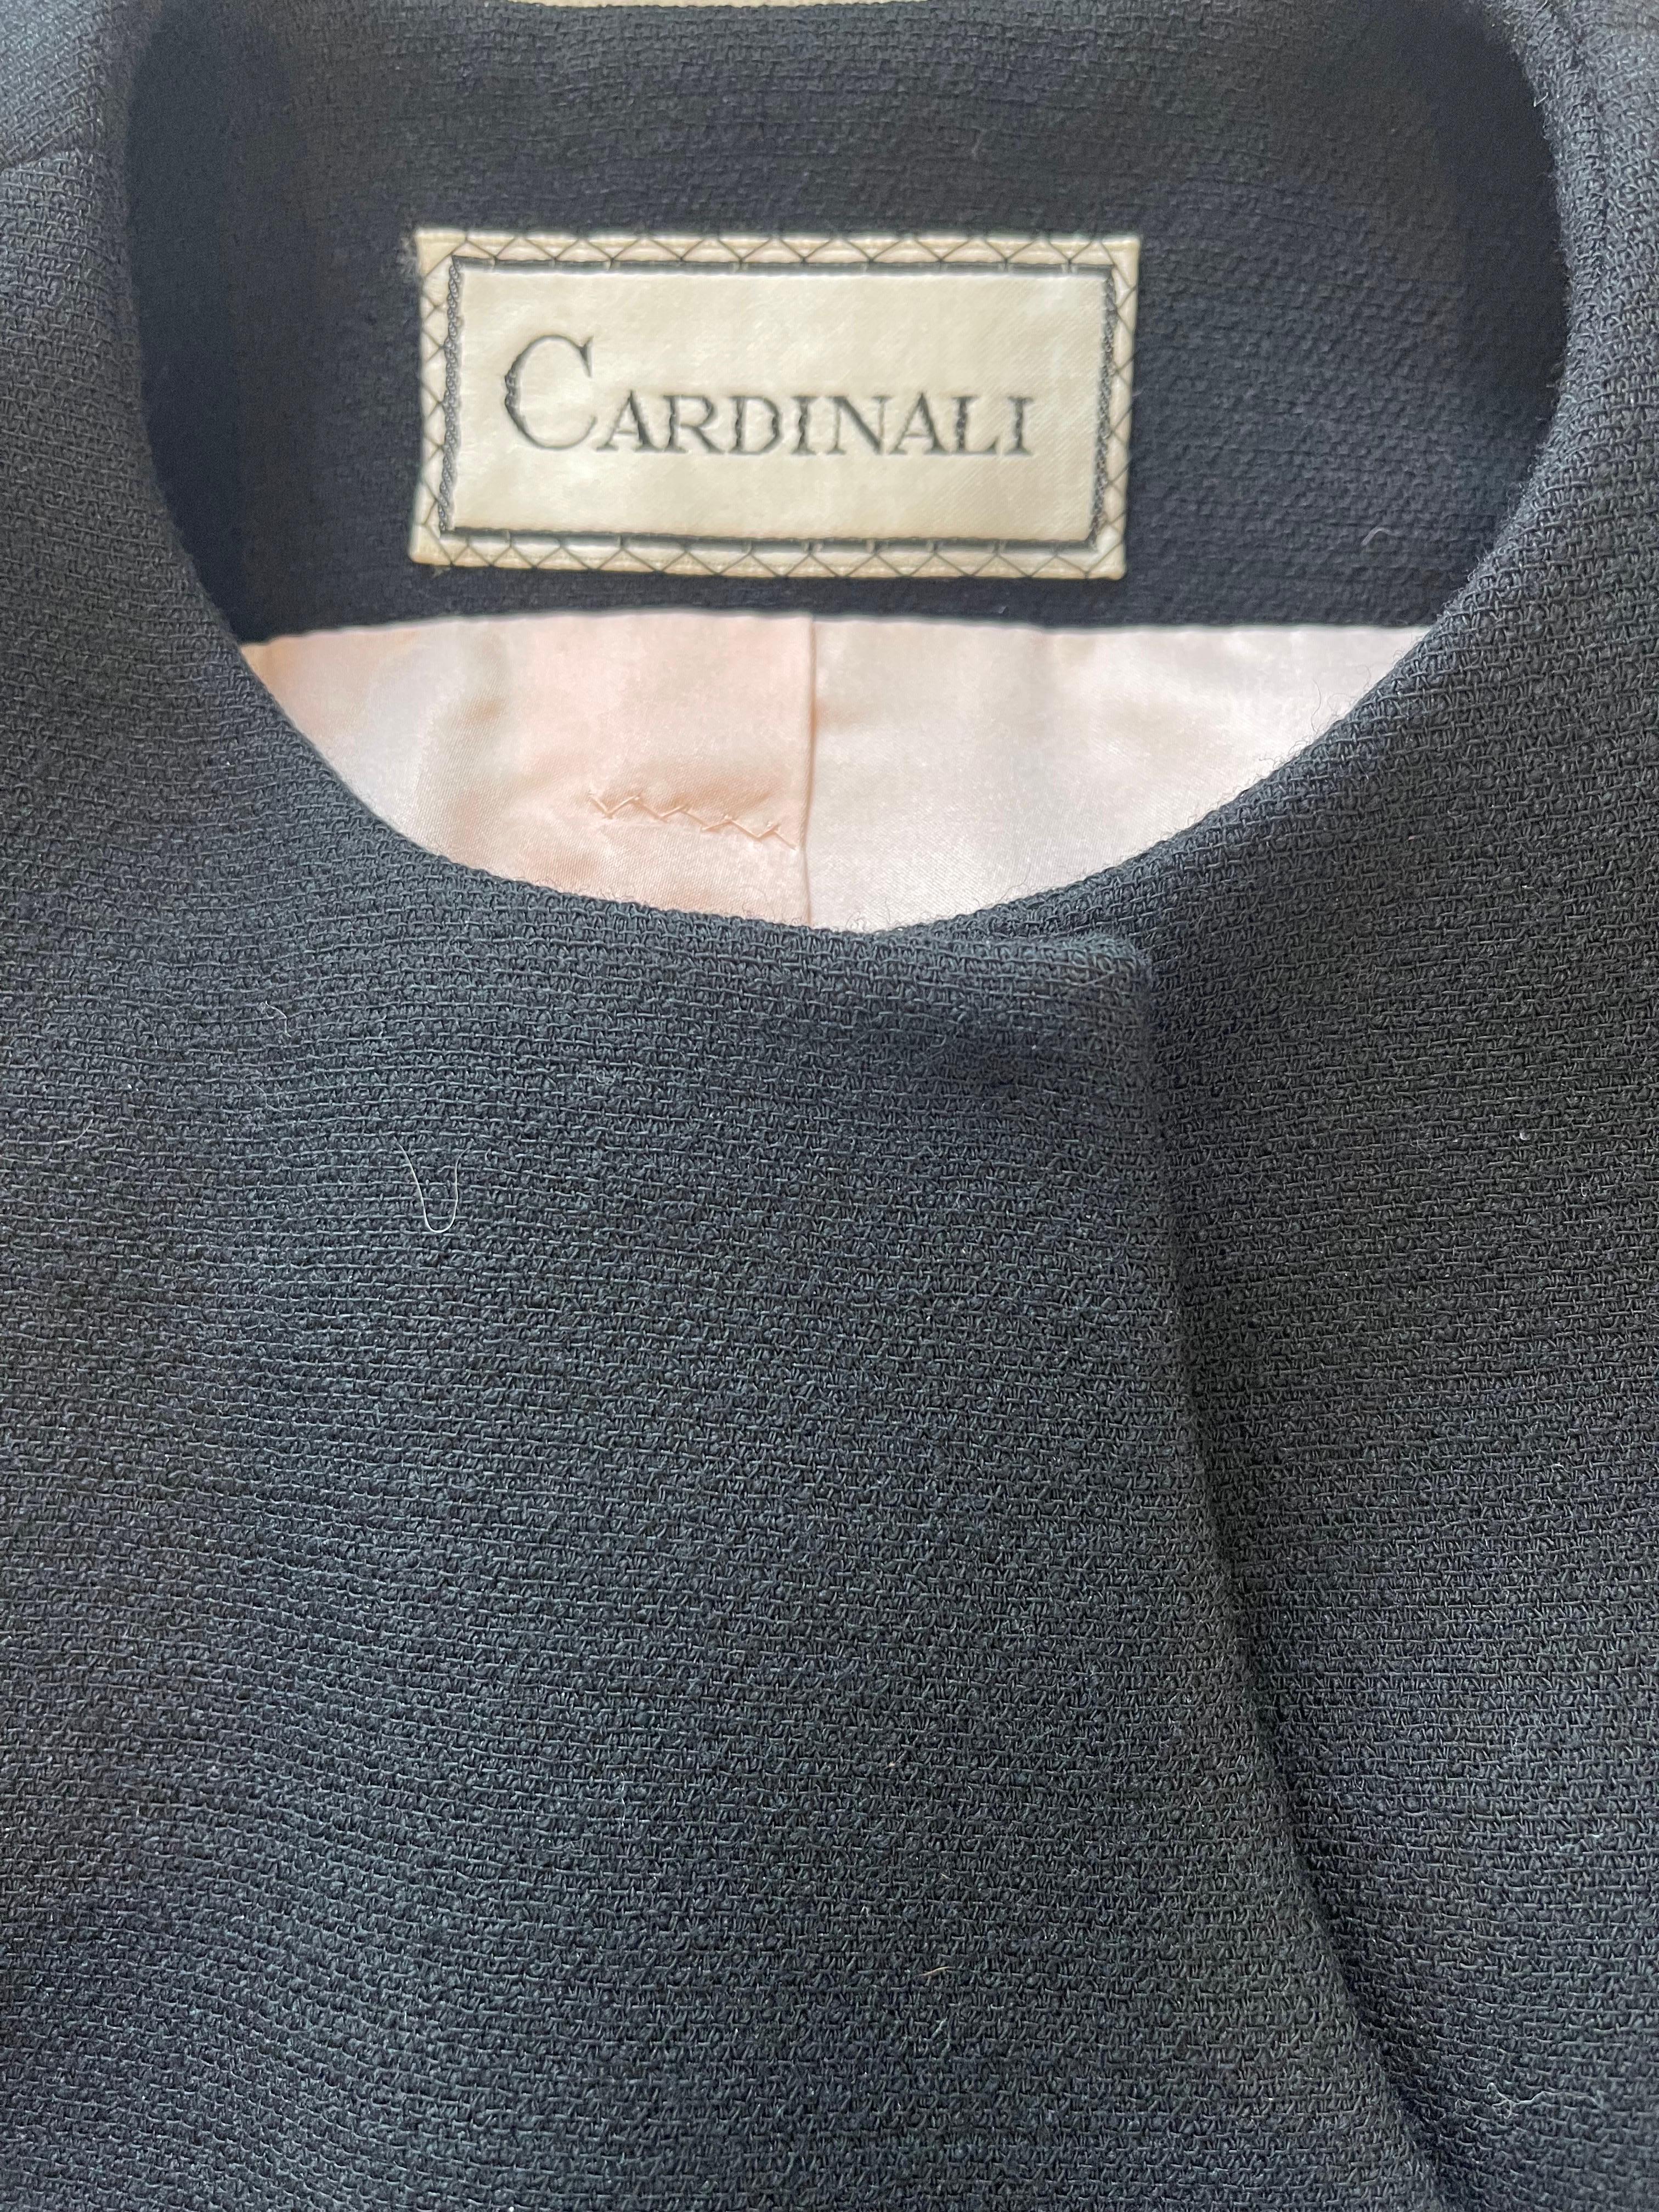 Chic vintage 60s Cardinali Couture black wool skirt suit ! Sleek tailored jacket features a unique asymmetrical closure with heavy duty hidden snaps. Beautiful light pink silk lining. Skirt has a flattering A-Line shape with hidden metal zipper up